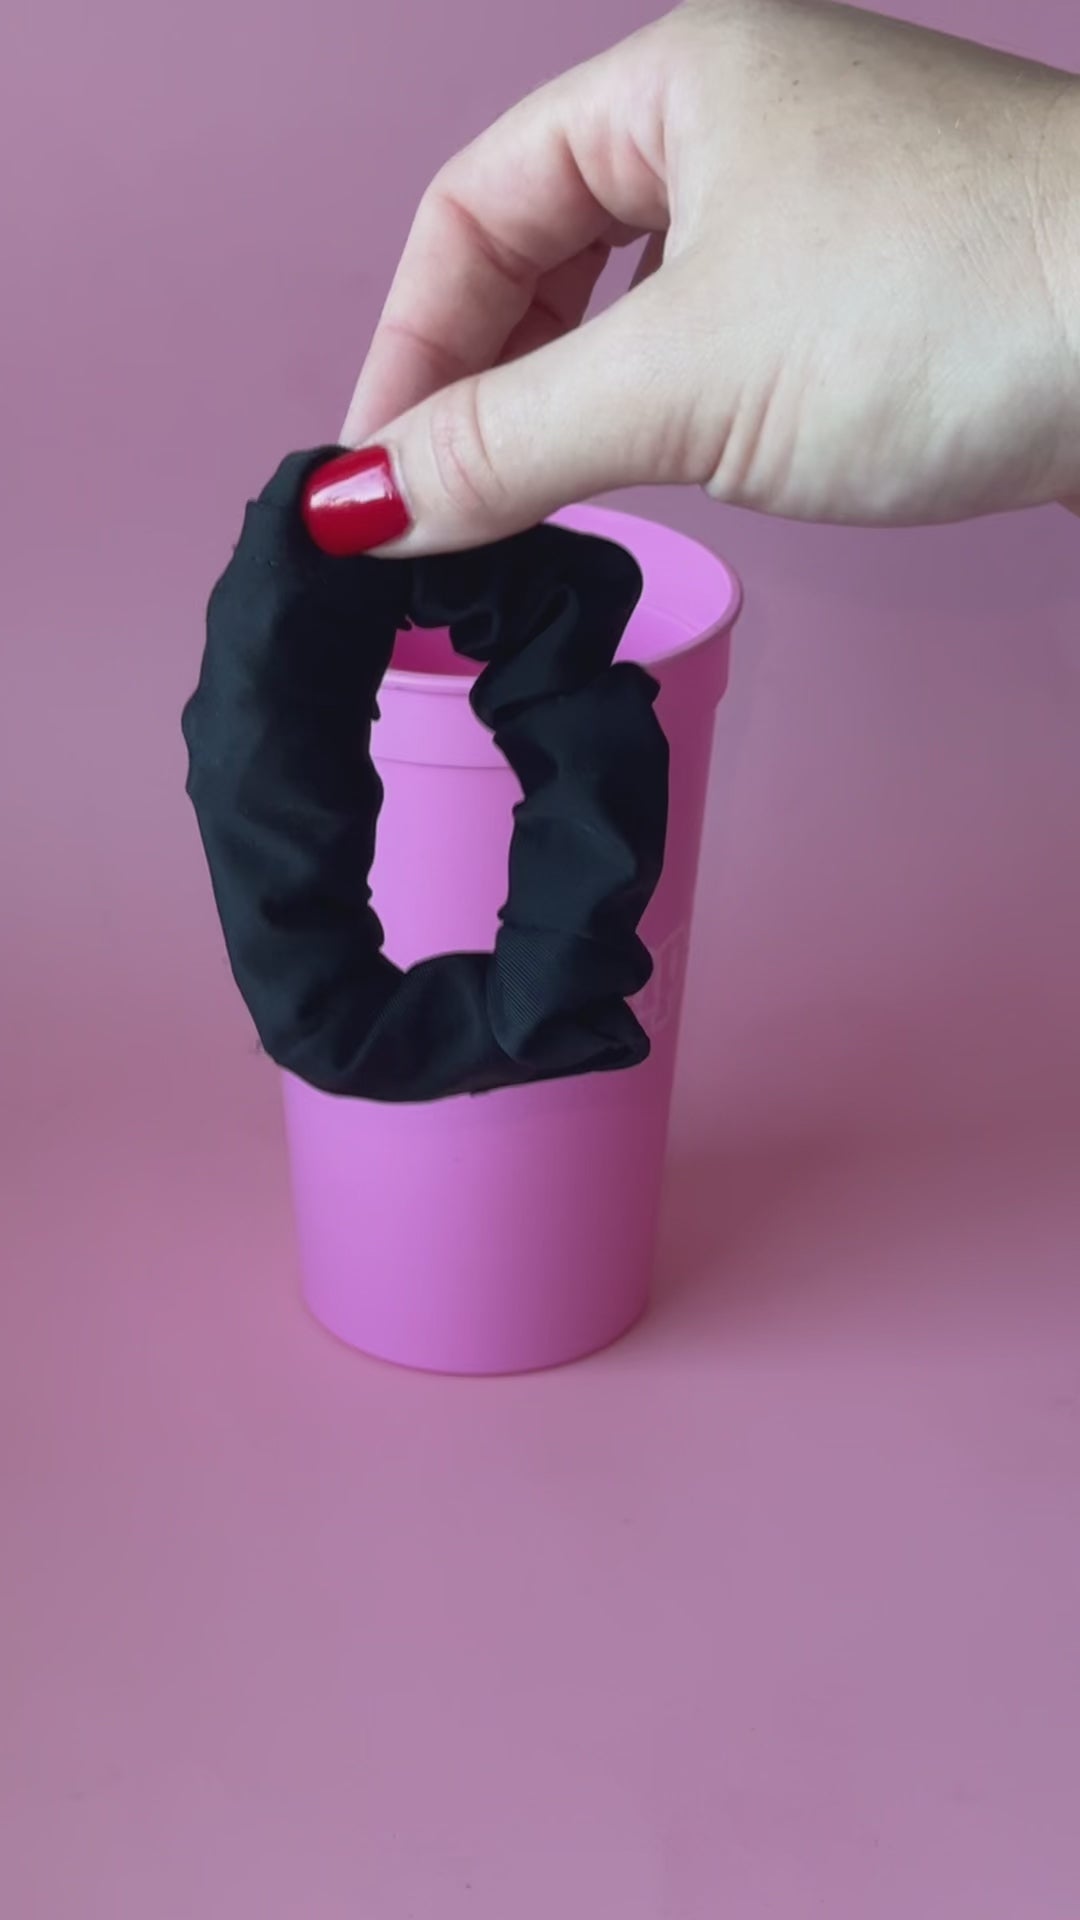  Nightcap The Original Drink Cover Scrunchie – As Seen On Shark  Tank And TikTok - Reusable - Wear On Wrist Or In Hair, Prevent Drink  Spiking - Sanitary Pocket Keeps Cover